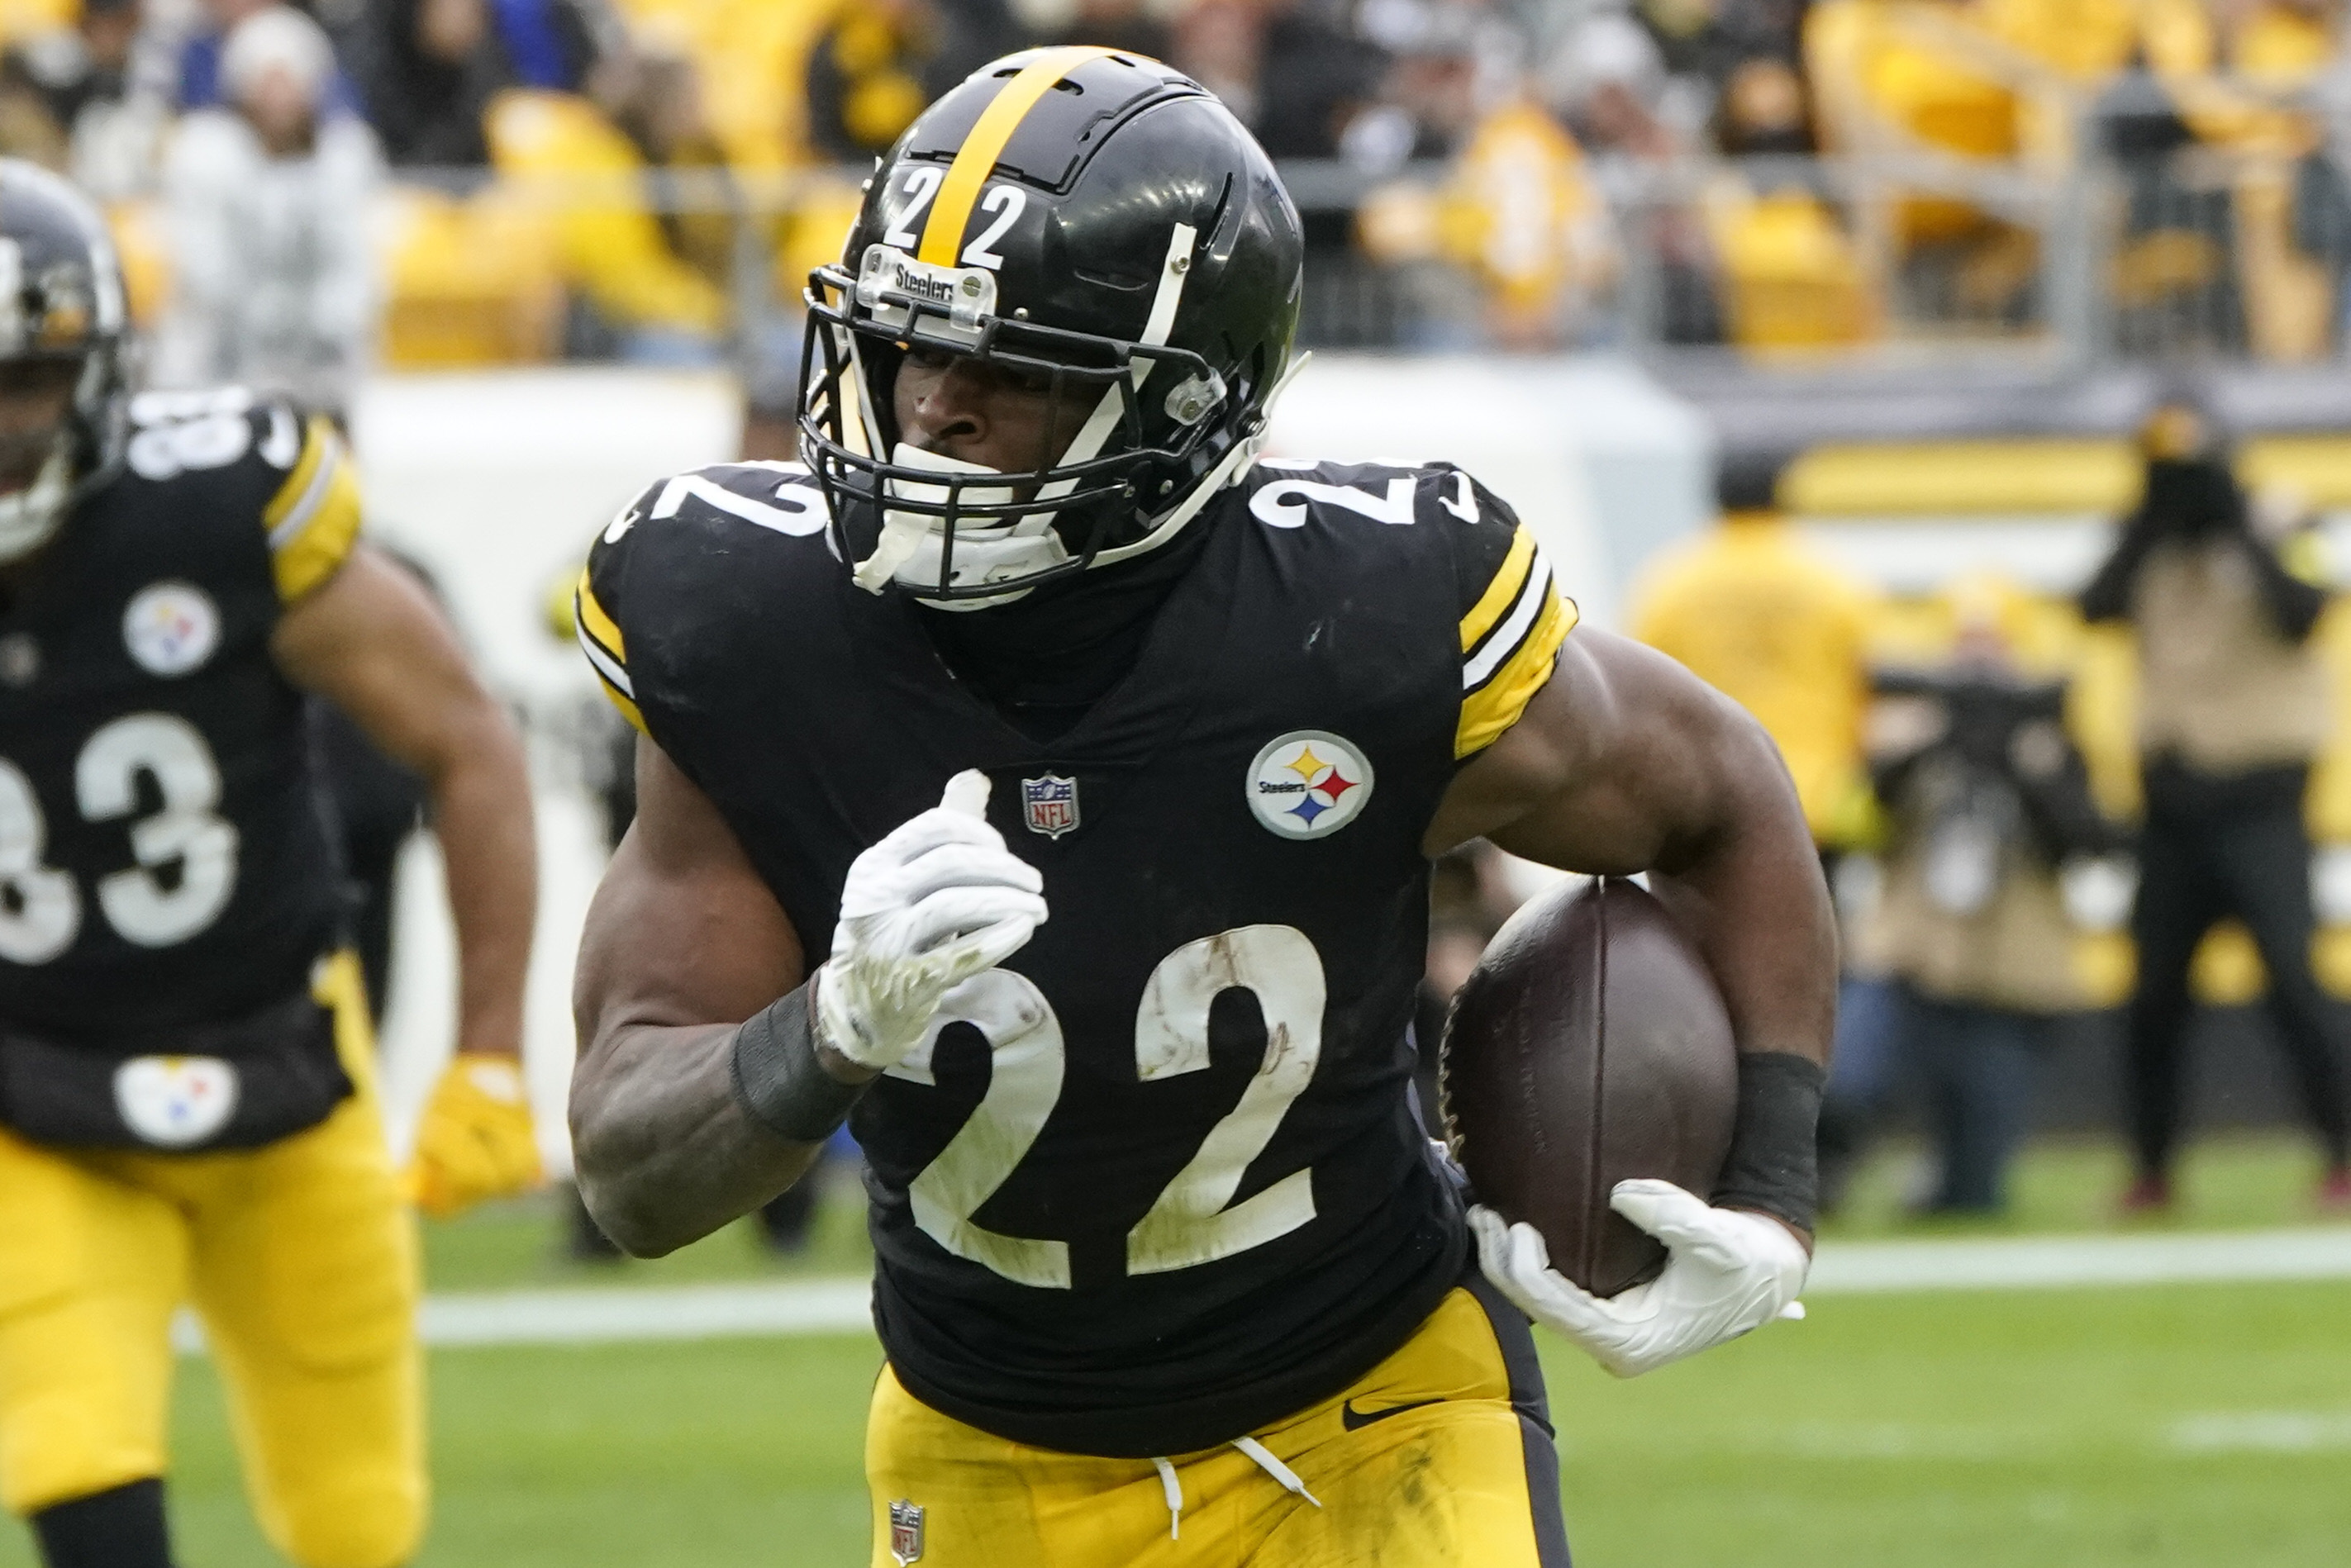 Steelers vs. Colts prediction, betting odds for NFL Week 12 